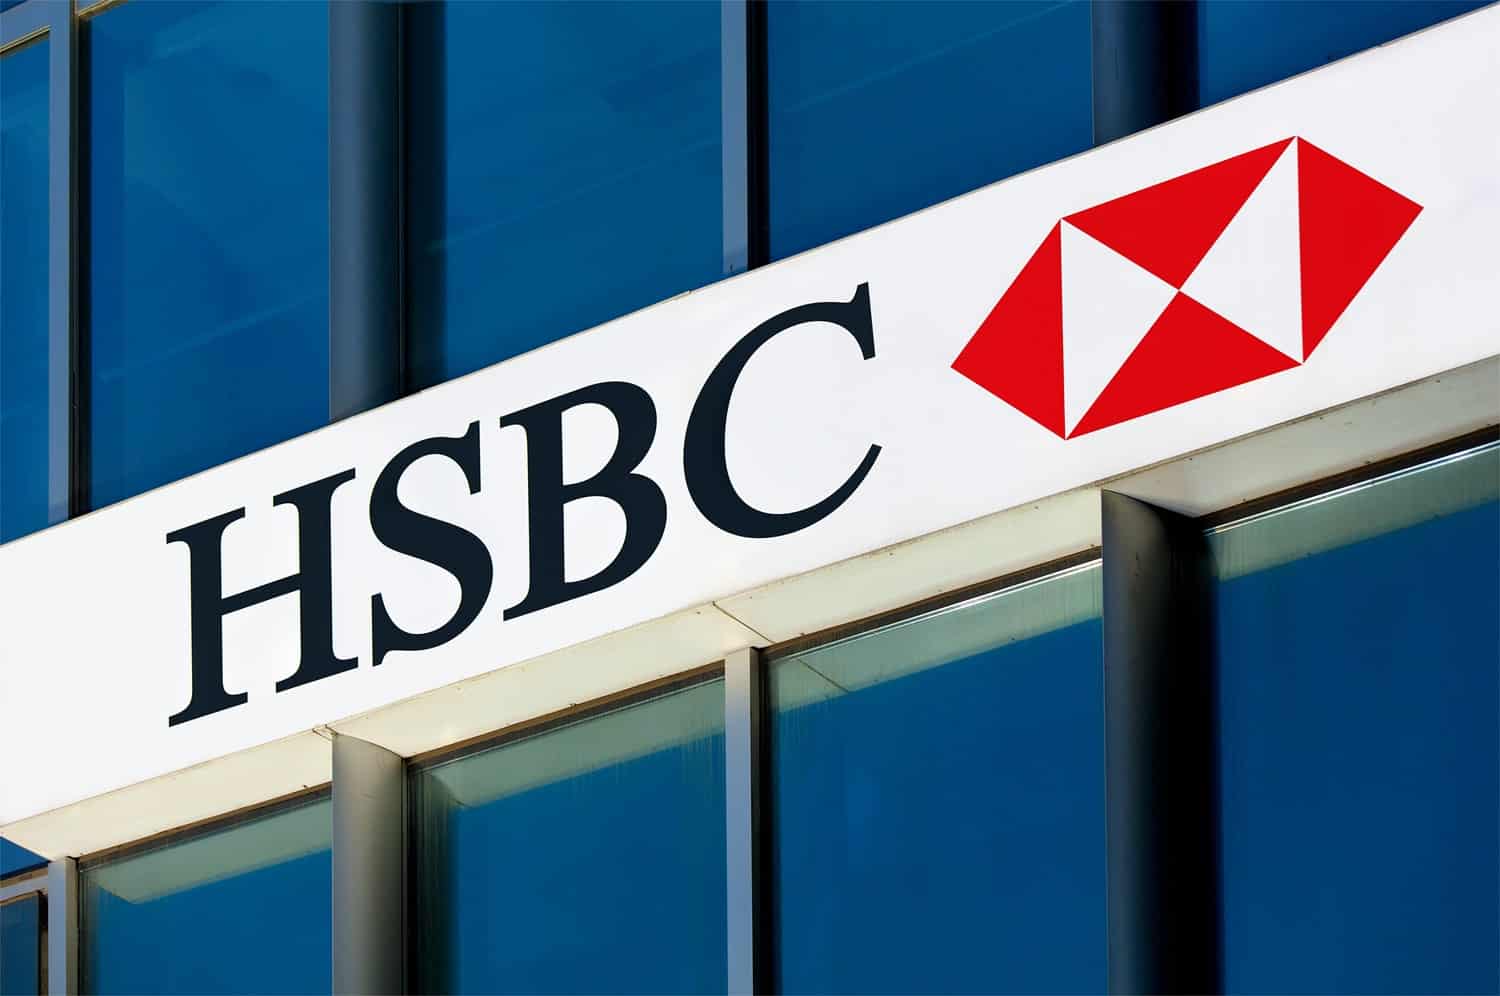 The HSBC sign on a bank branch in Beijing, China.